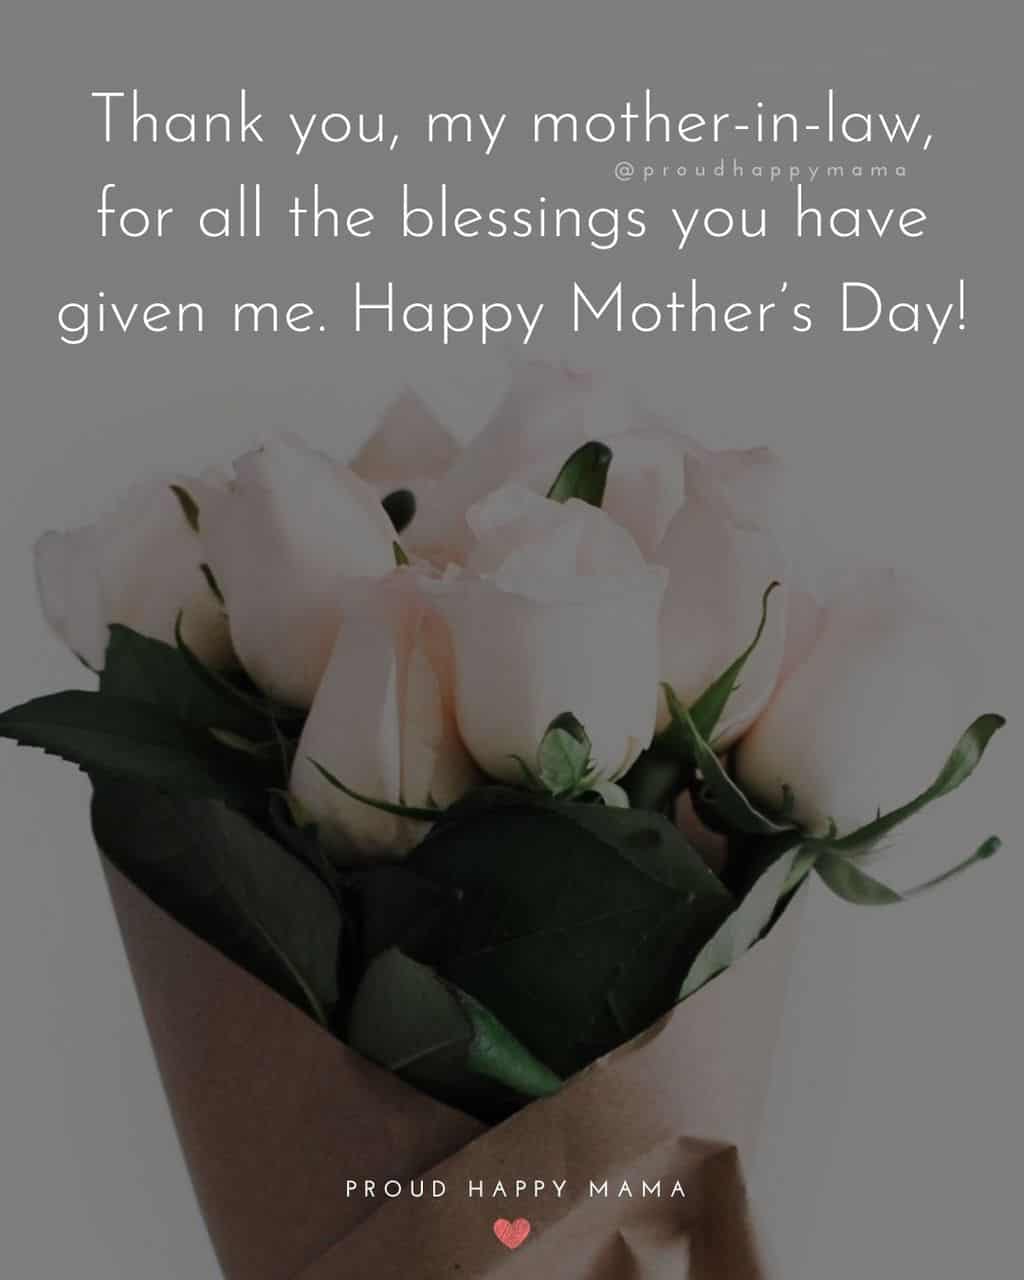 Happy Mothers Day Quotes For Mother In Law - Thank you, my mother in law, for all the blessings you have given me. Happy